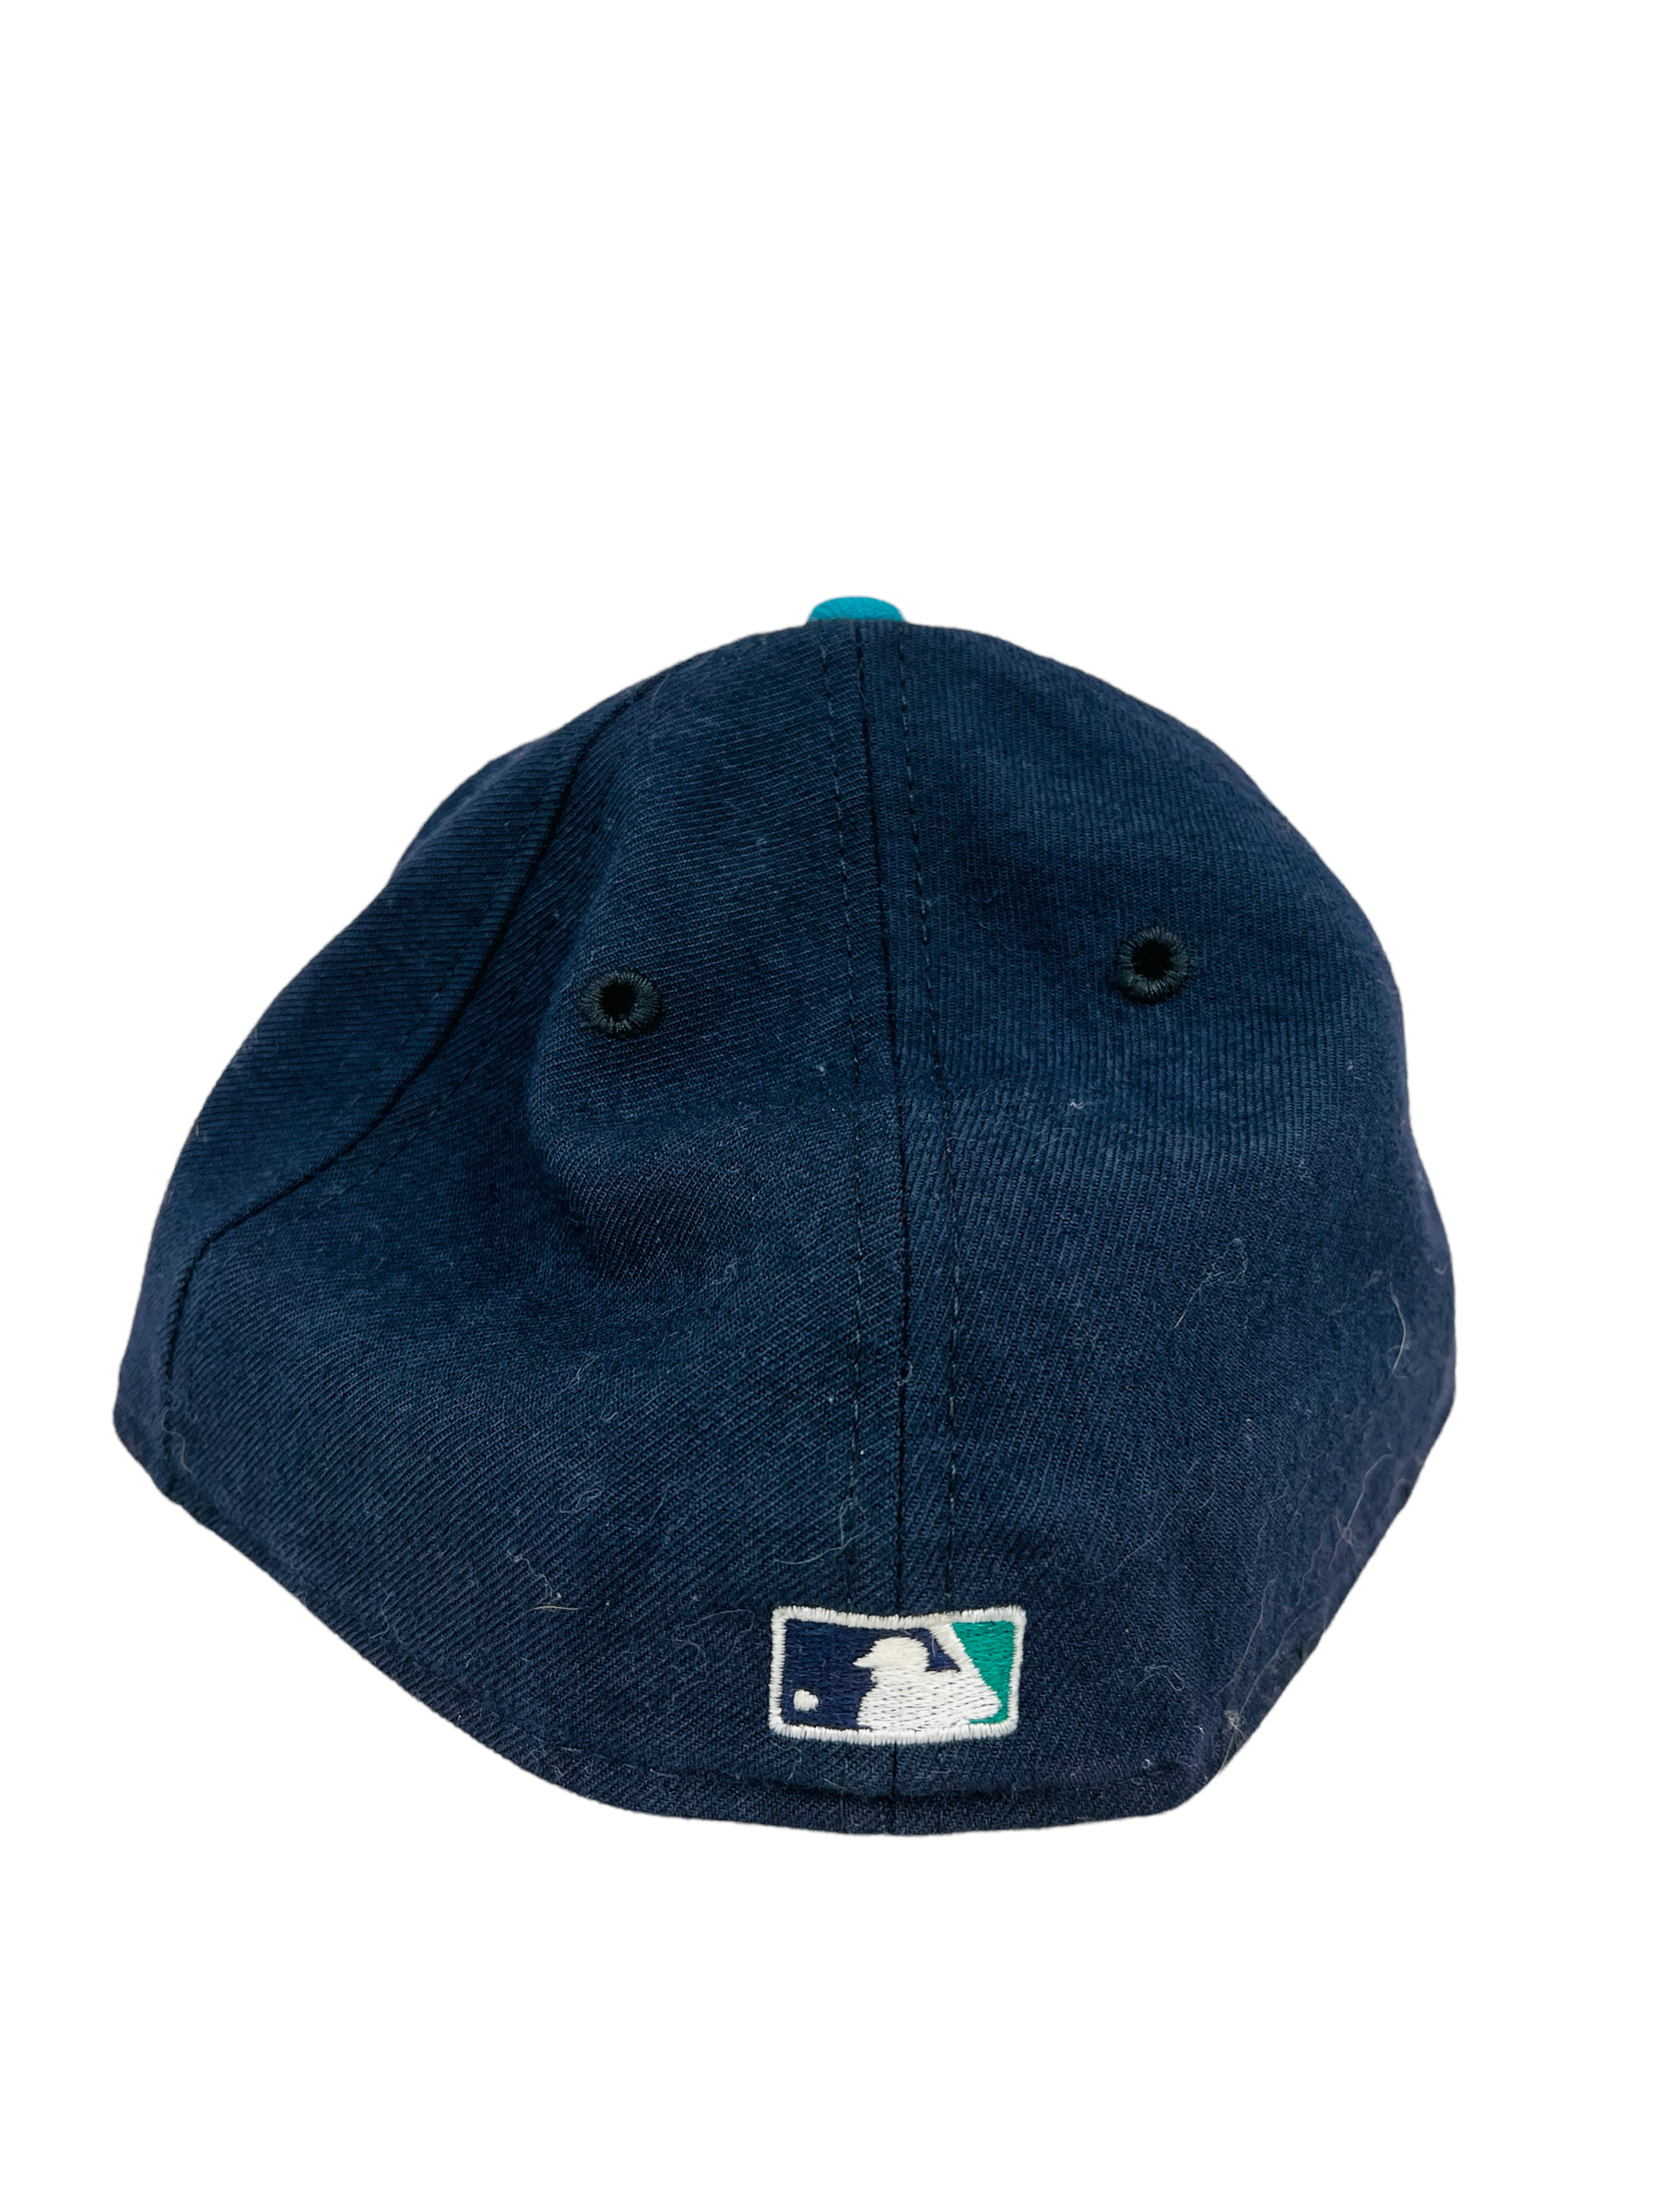 Seattle Mariners MLB Authentic Collection New Era 59Fifty Hat Size 7 1 -  clothing & accessories - by owner - apparel